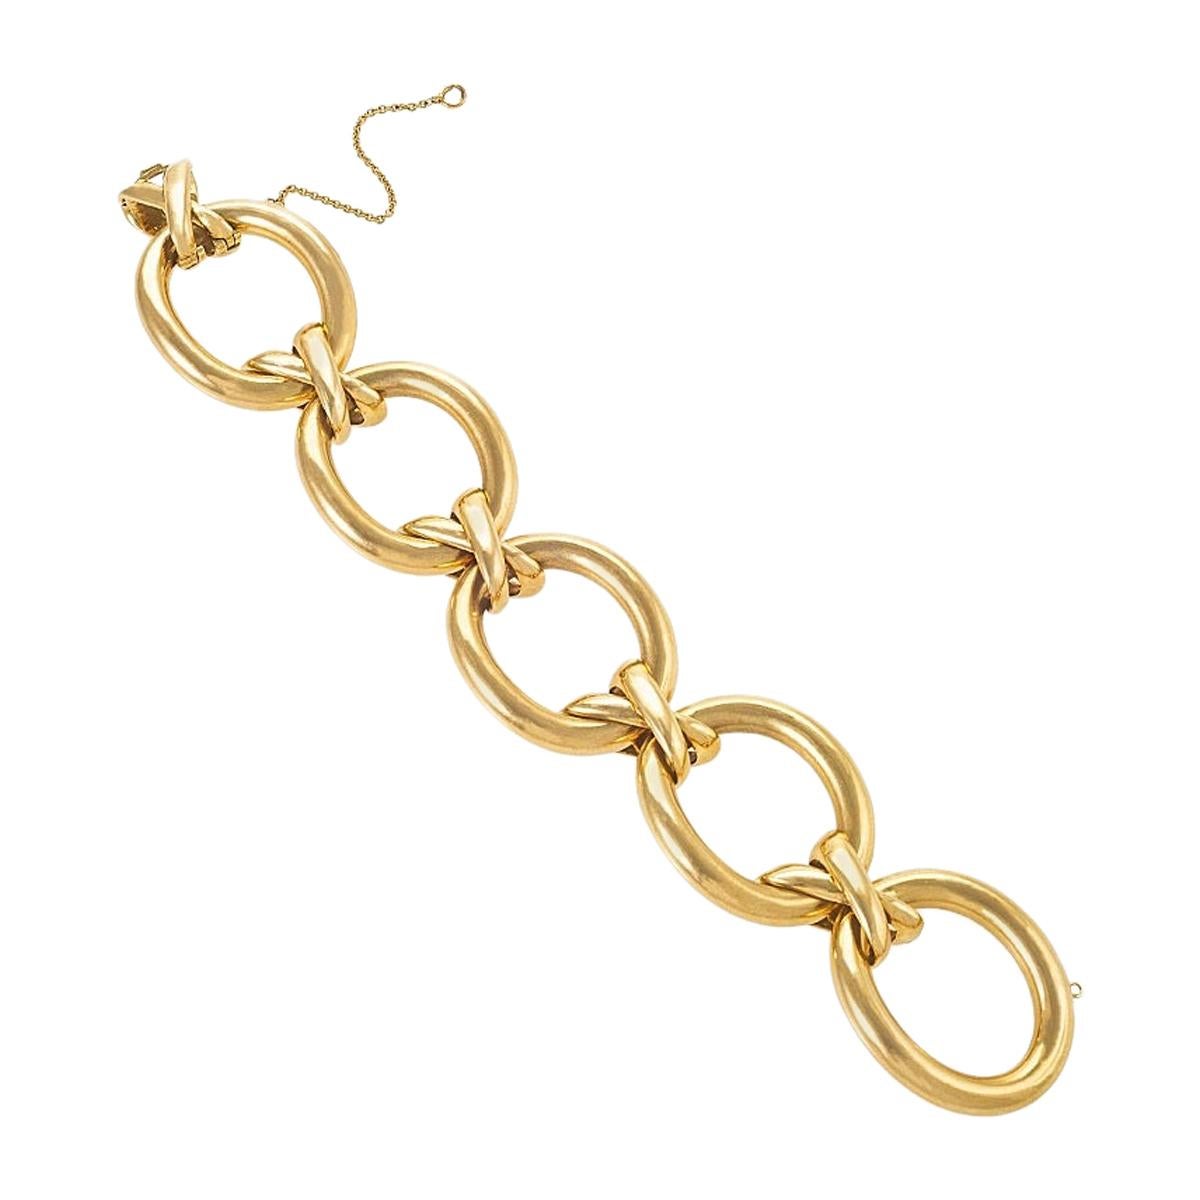 Gold Bracelet by Paloma Picasso for Tiffany & Co.